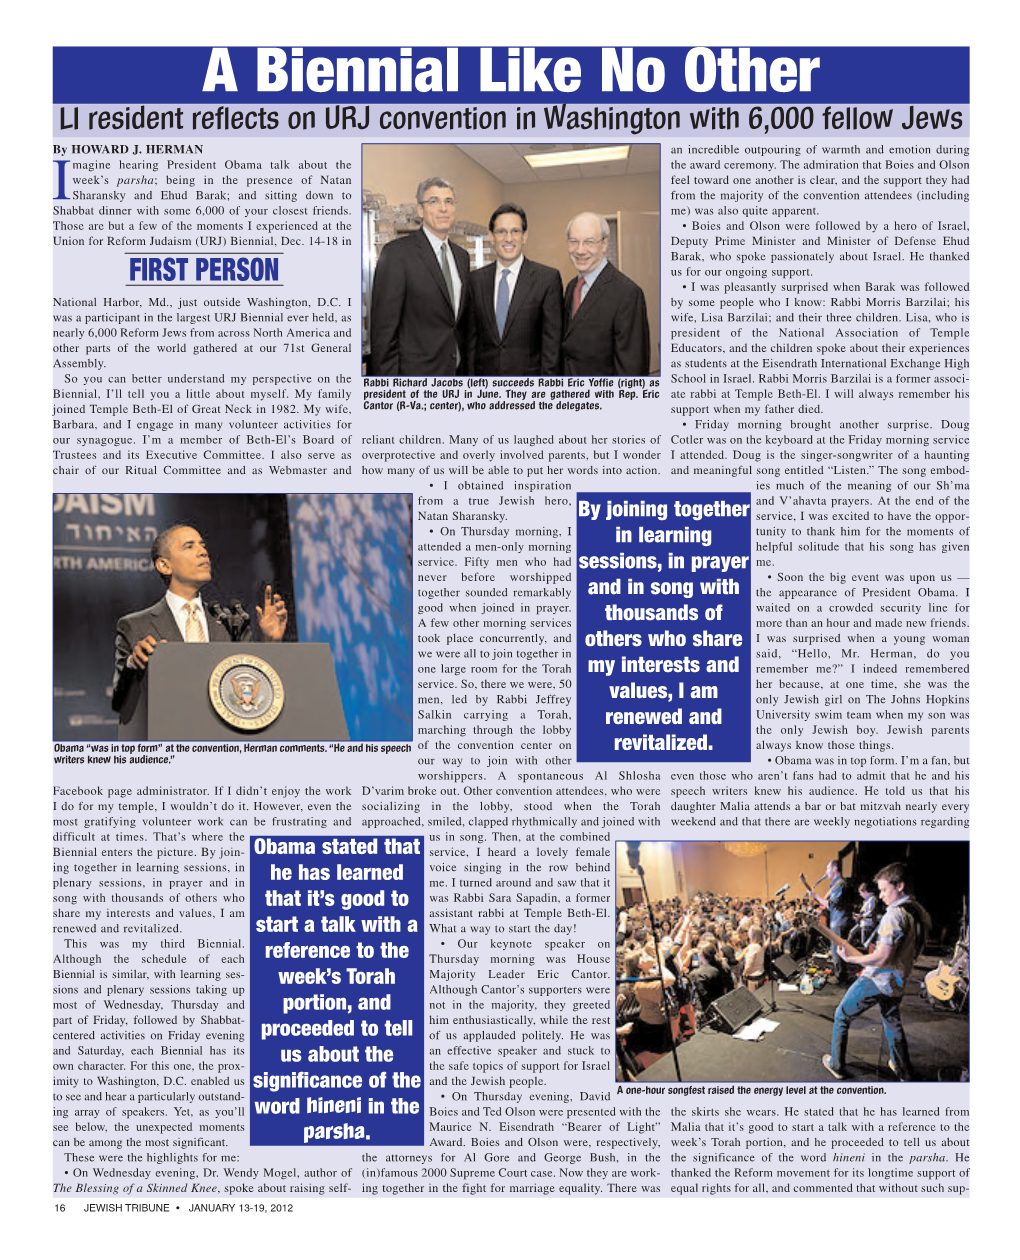 A Biennial Like No Other LI Resident Reflects on URJ Convention in Washington with 6,000 Fellow Jews by HOWARD J